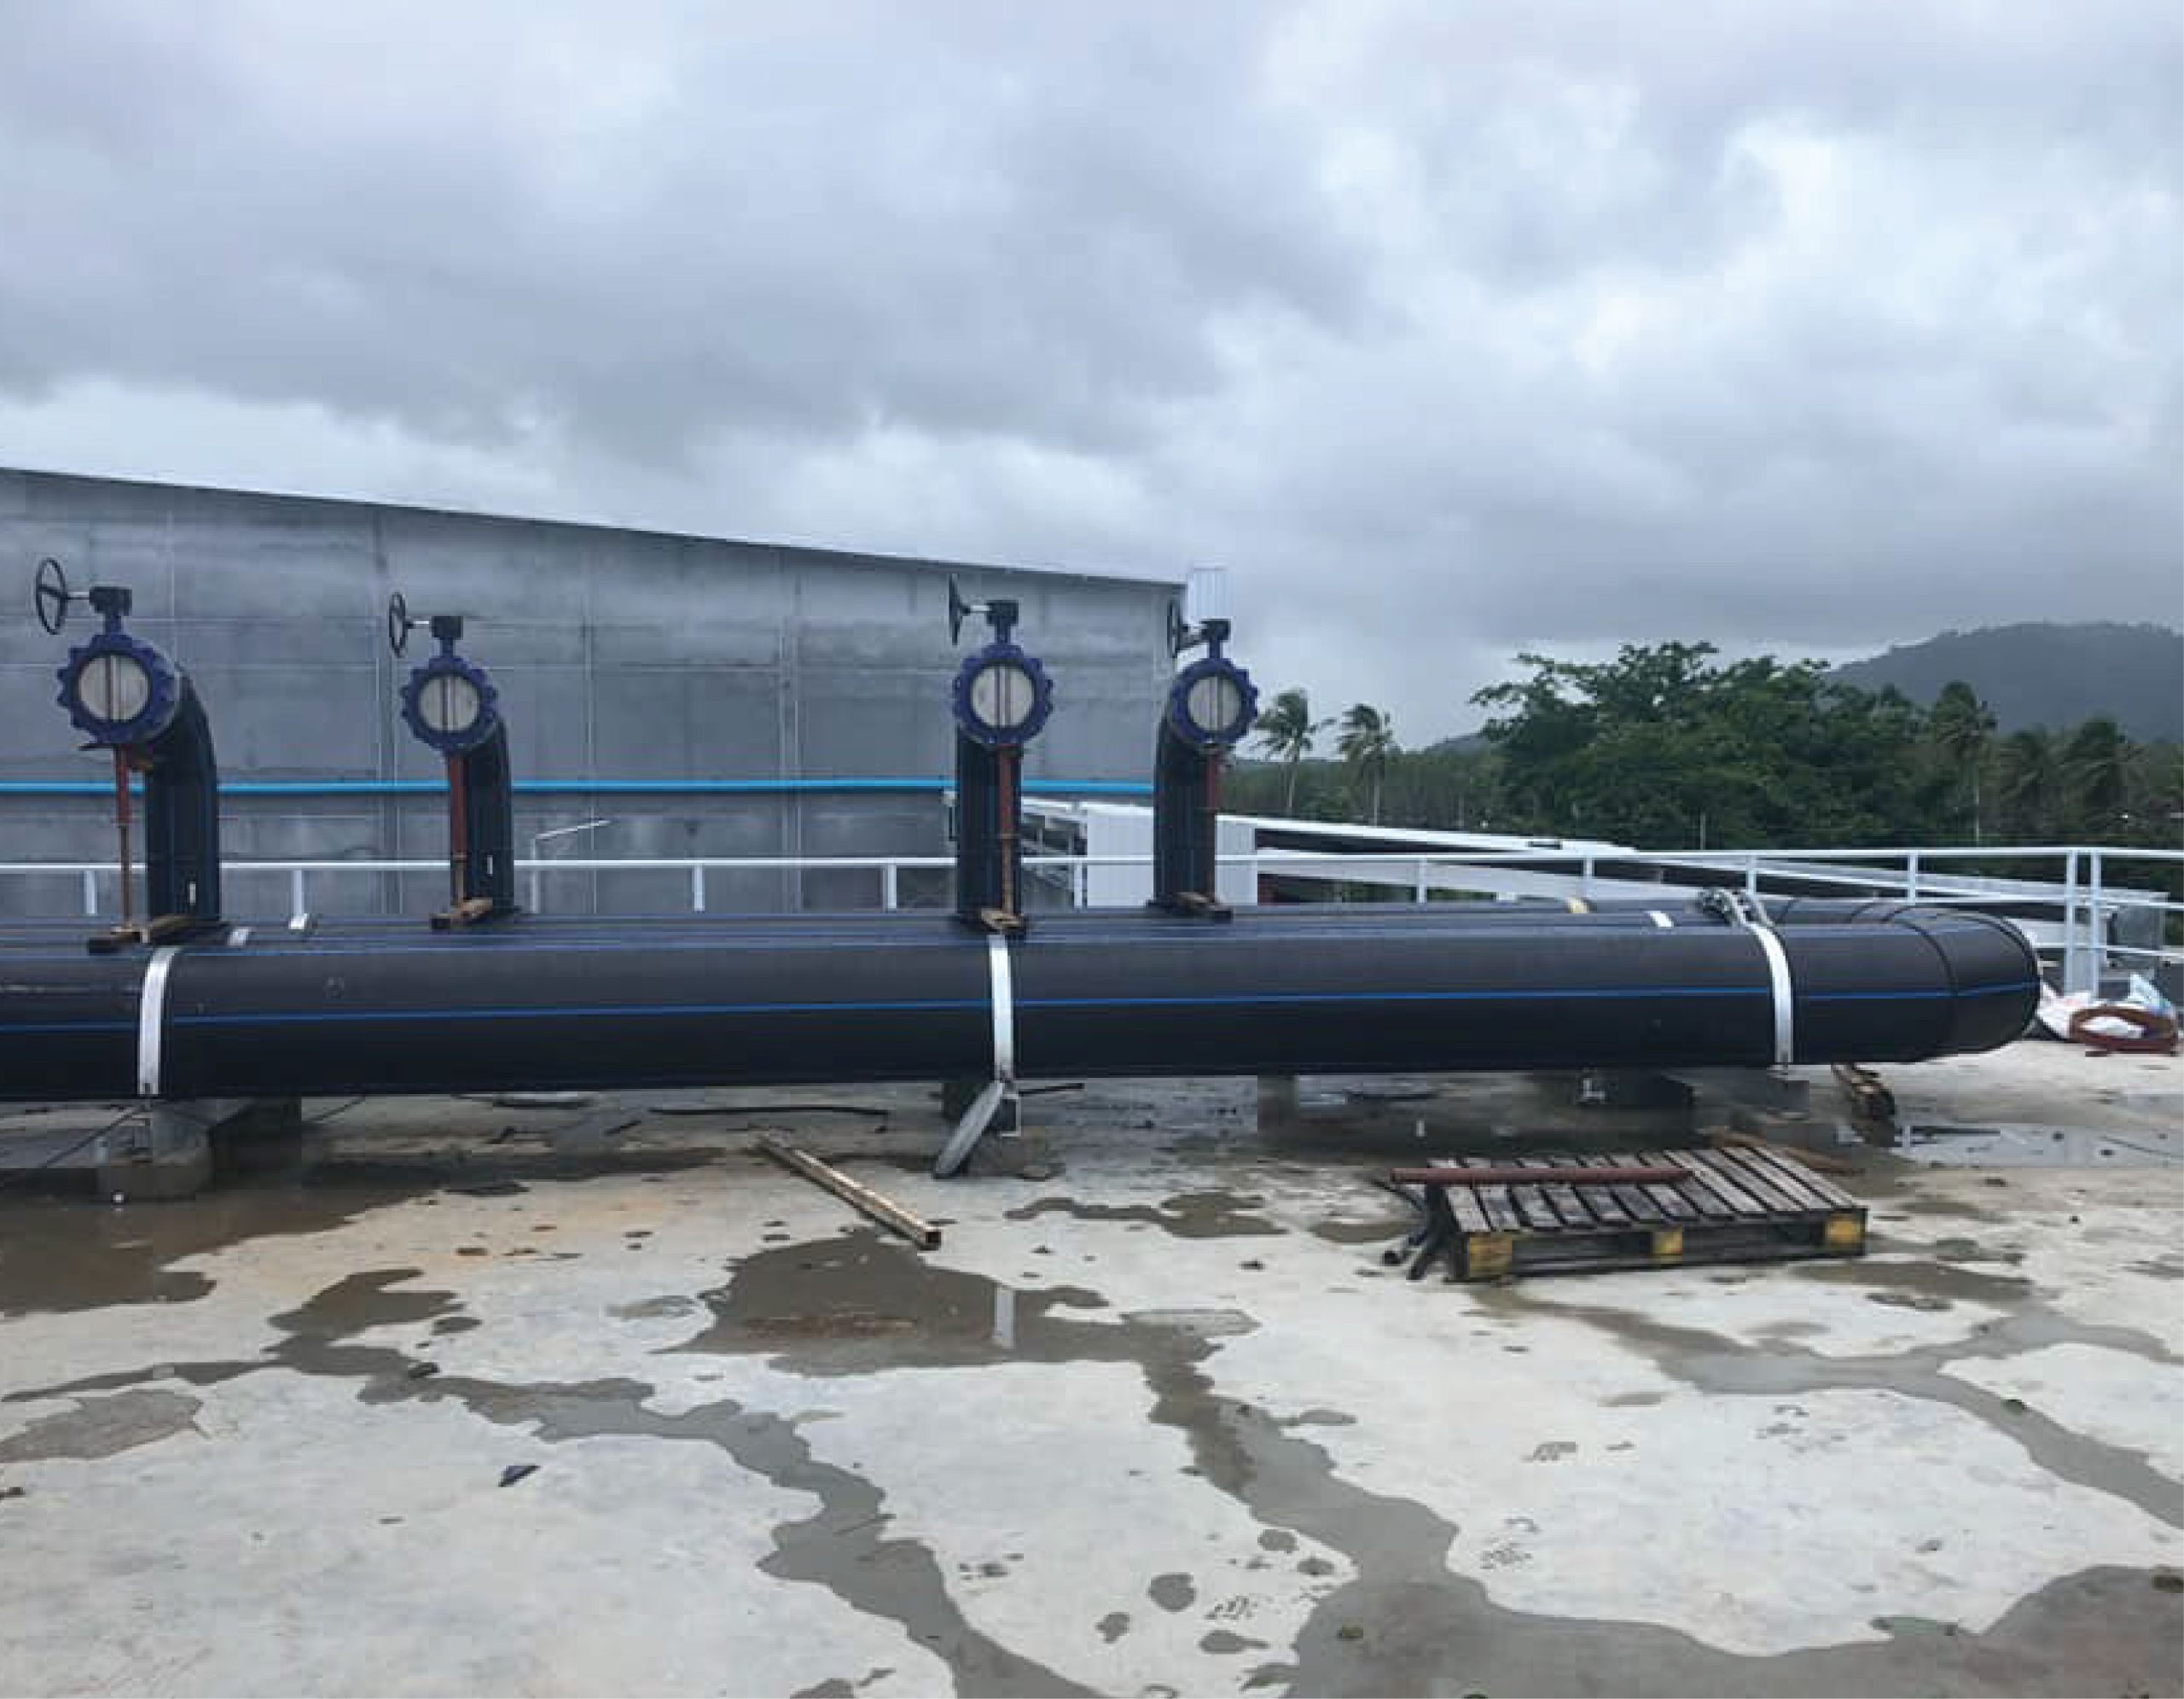 HDPE pipes that take heat away from the building in the cooling system installed at Robinson Phuket